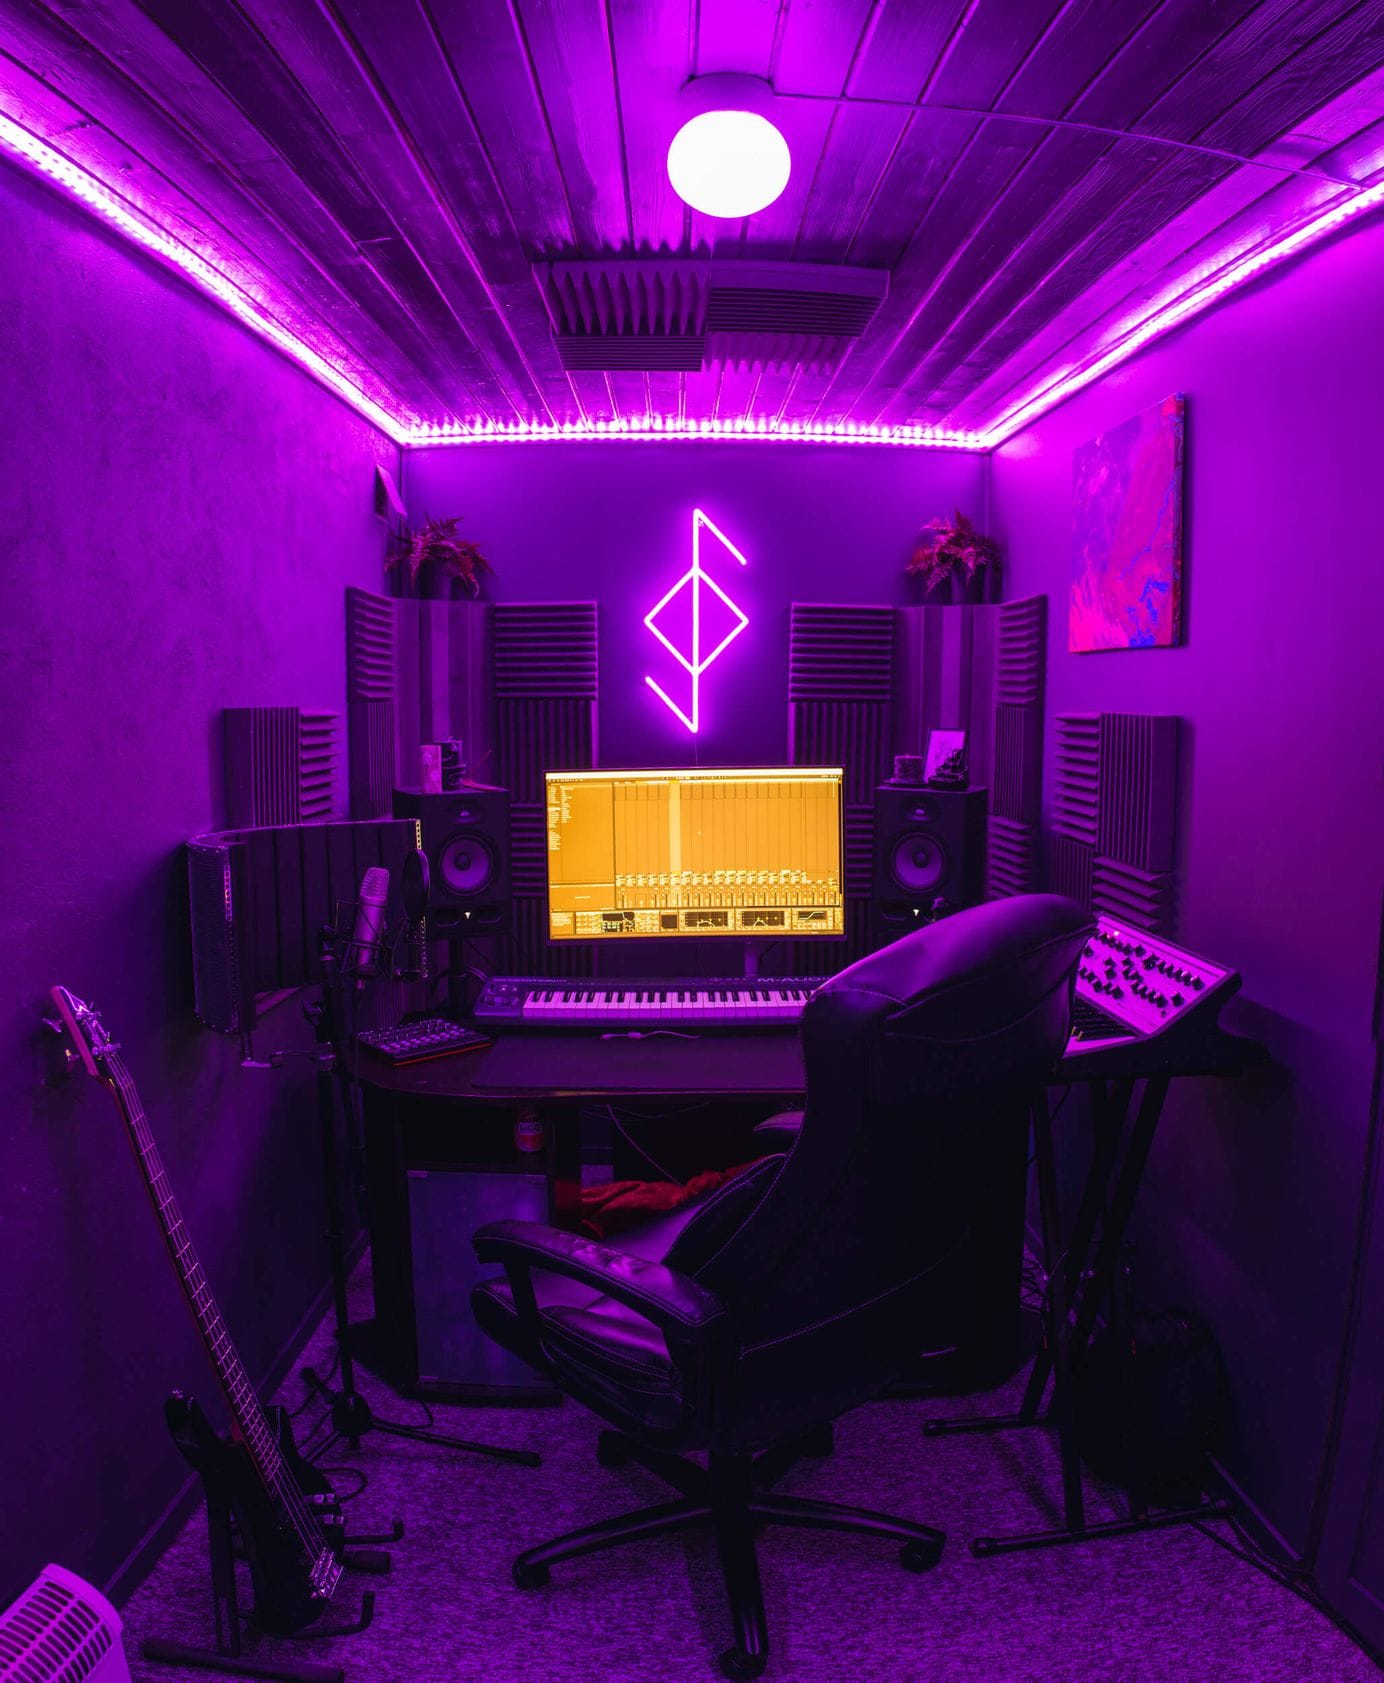 A vibrant and cosy home music studio with purple LED lighting, featuring a sleek black desk equipped with a computer monitor, keyboard, speakers, and recording equipment